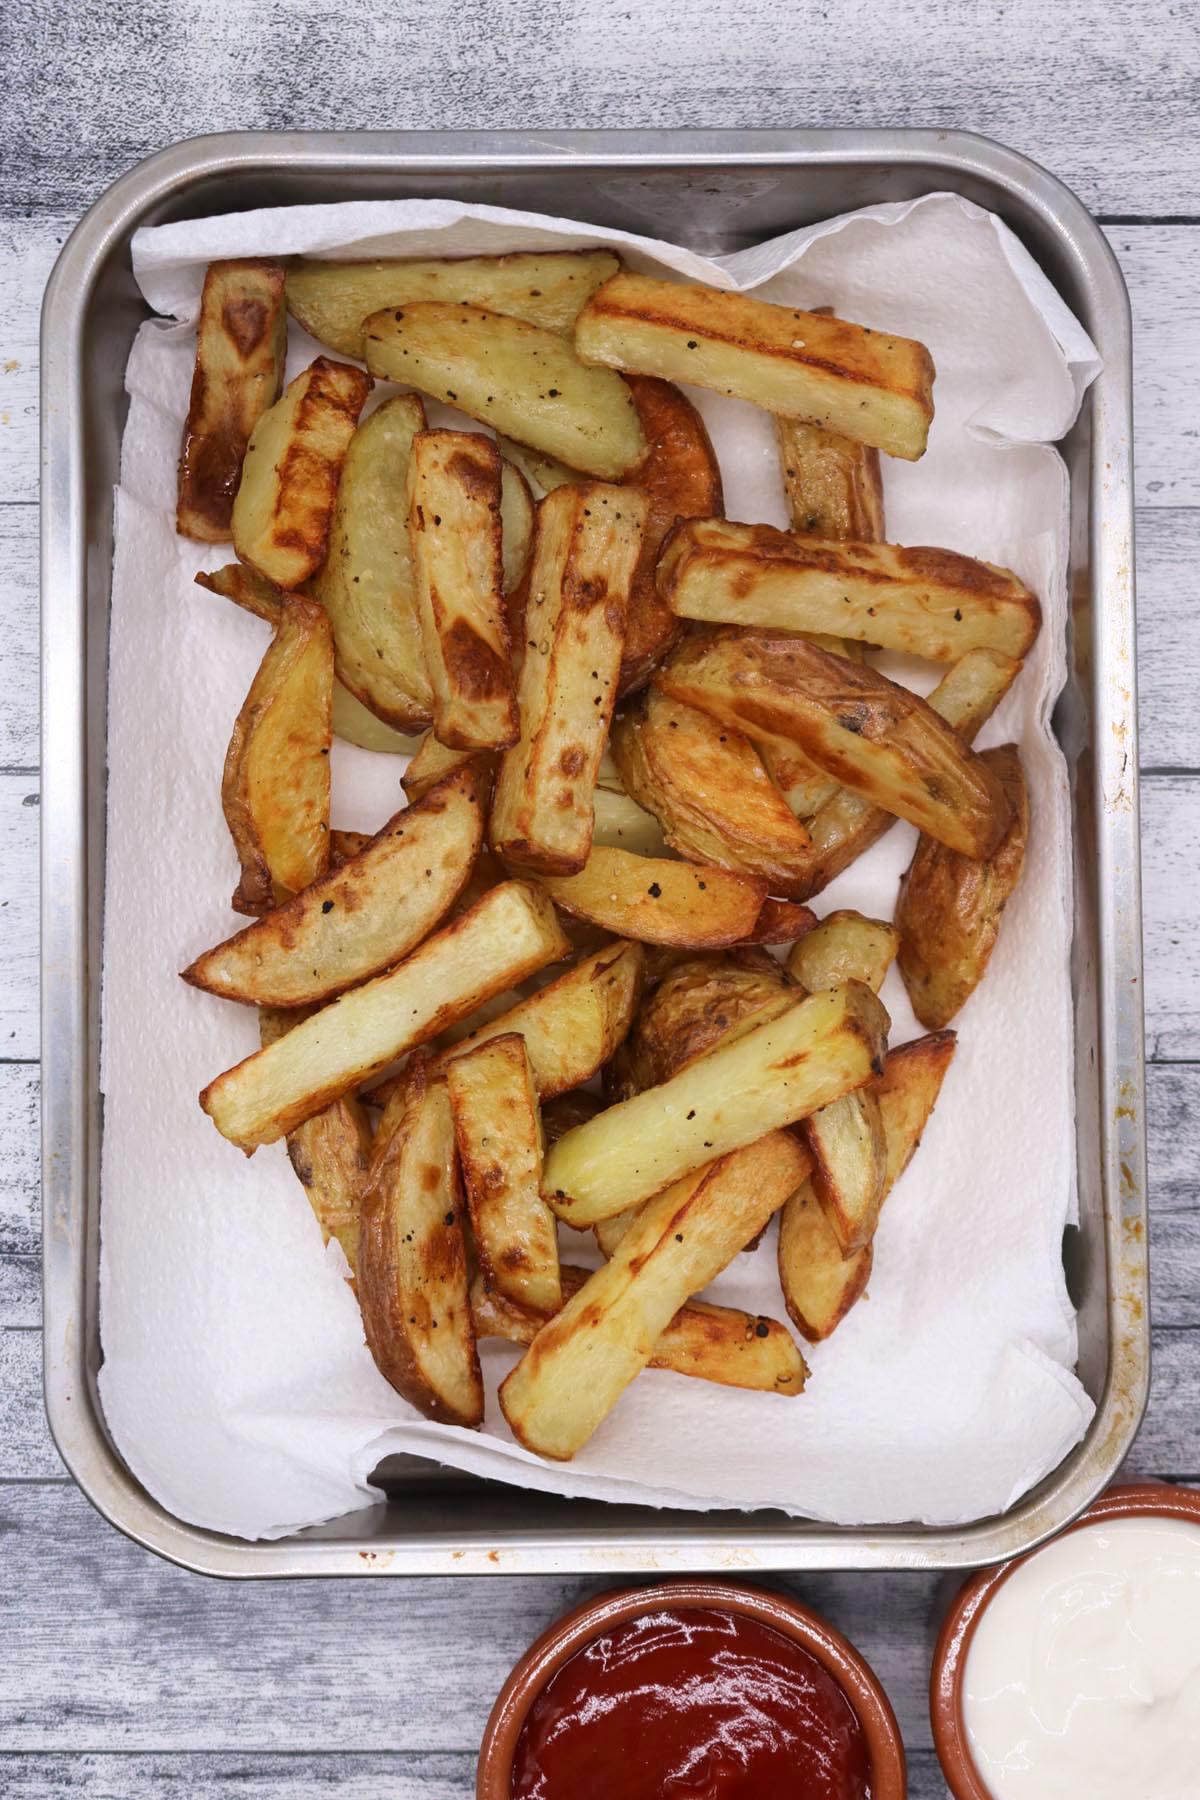 chunky oven chips on kitchen towel in a rectangle oven tray